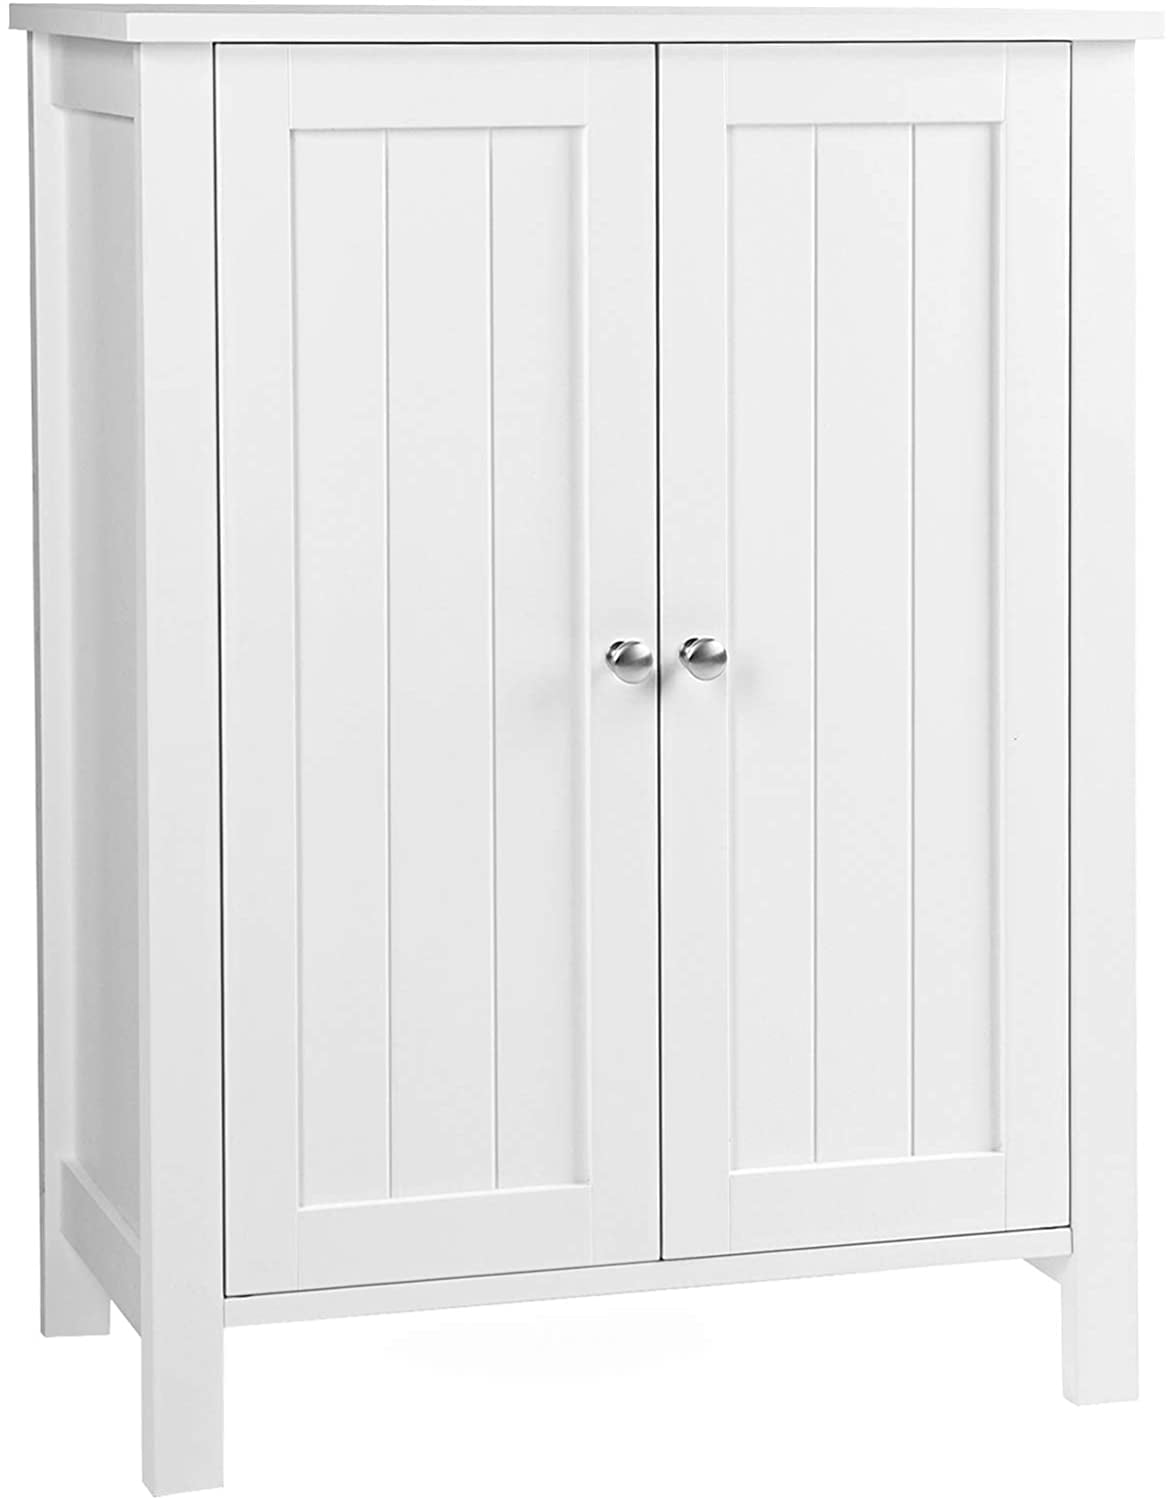 Freestanding Storage Cabinet with Drawer Matte White UBBC142W01 29.5 x 11.8 x 31.5 Inches 3 Open Compartments Adjustable Shelves VASAGLE Bathroom Cabinet Floor Cabinet Scandinavian Style